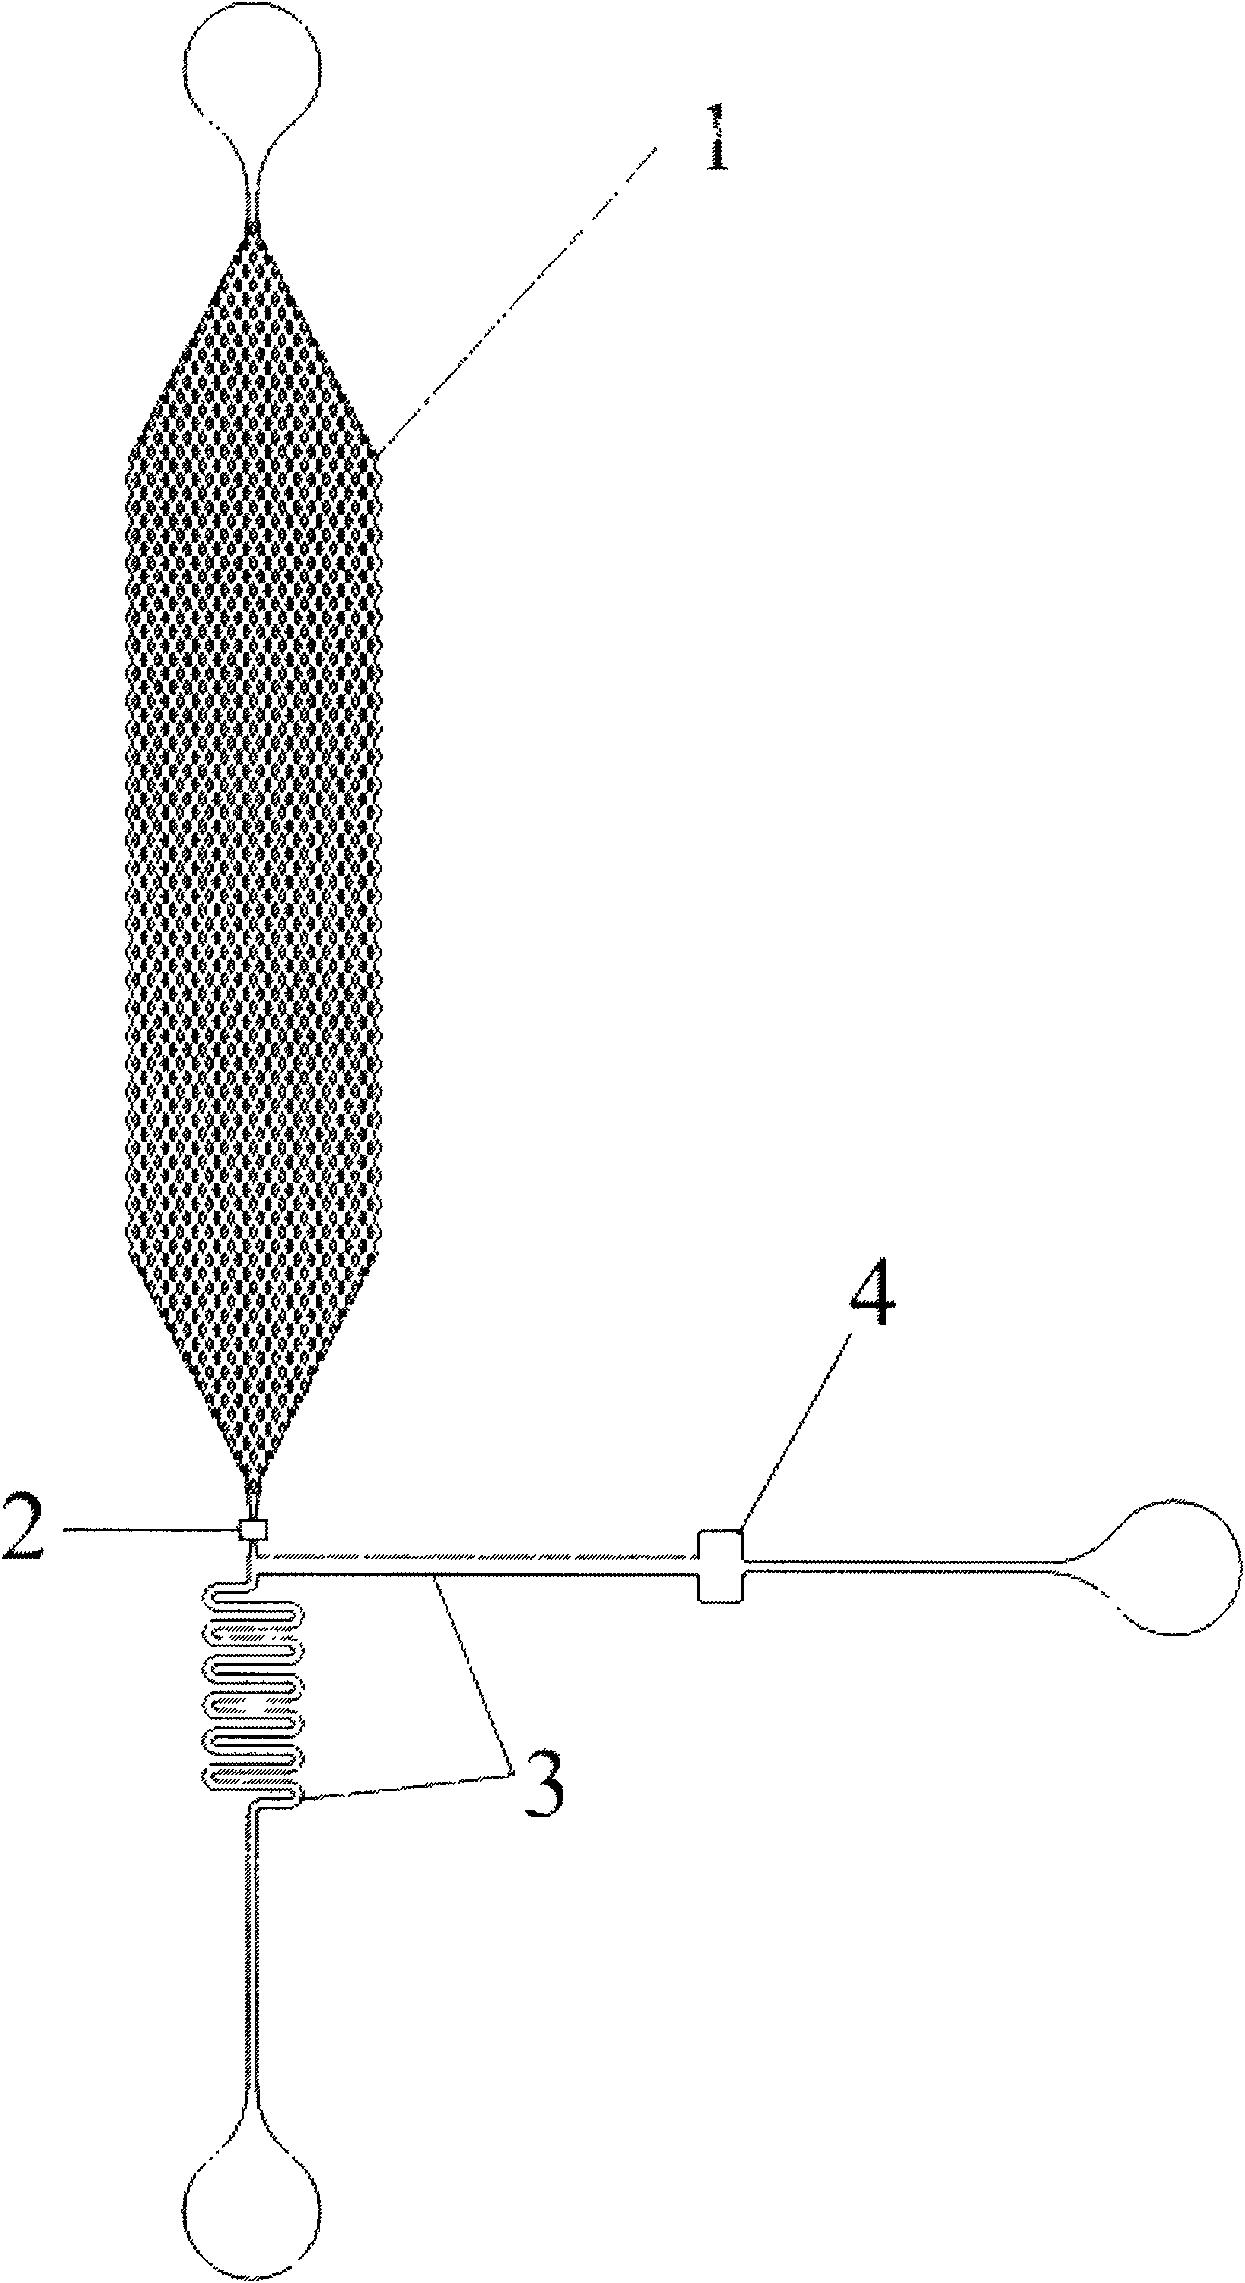 A micropump based on capillary action and its application method